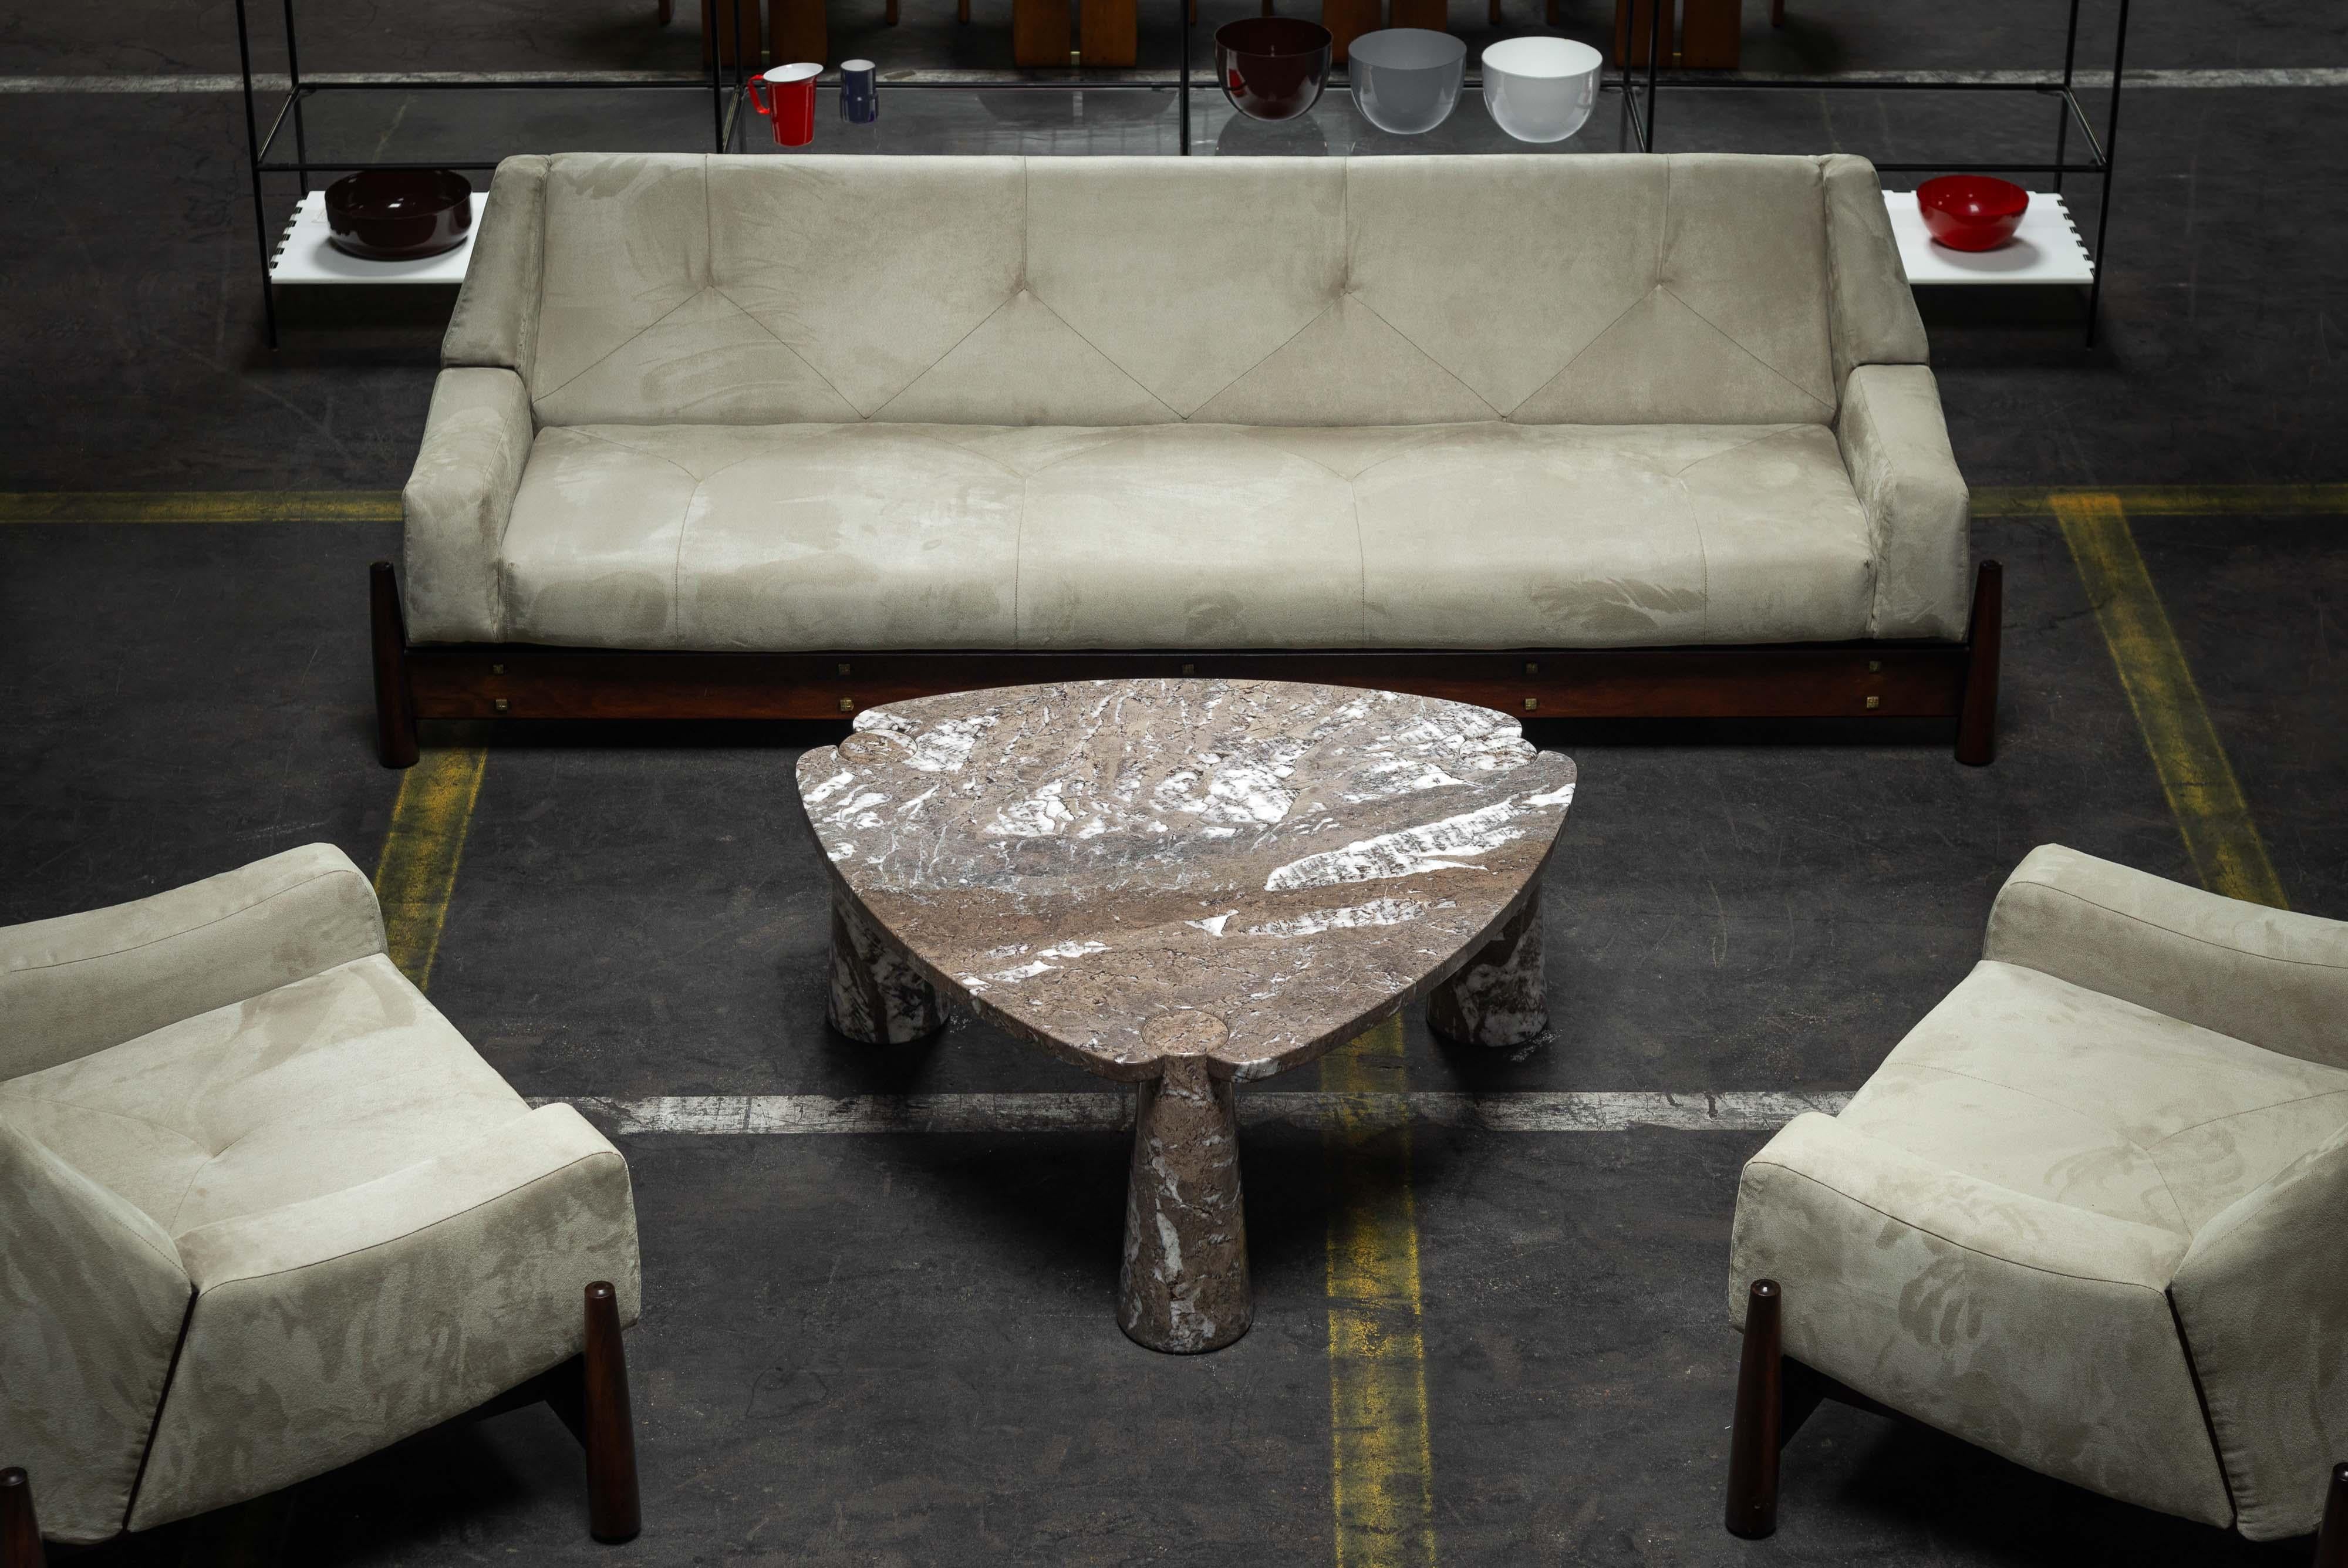 Stunning triangular coffee table from the Eros series designed by Angelo Mangiarotti and manufactured by Skipper in Italy in 1971. Made of solid Mondragone marble with an absolutely mesmerizing grain to it with the typical white veins running